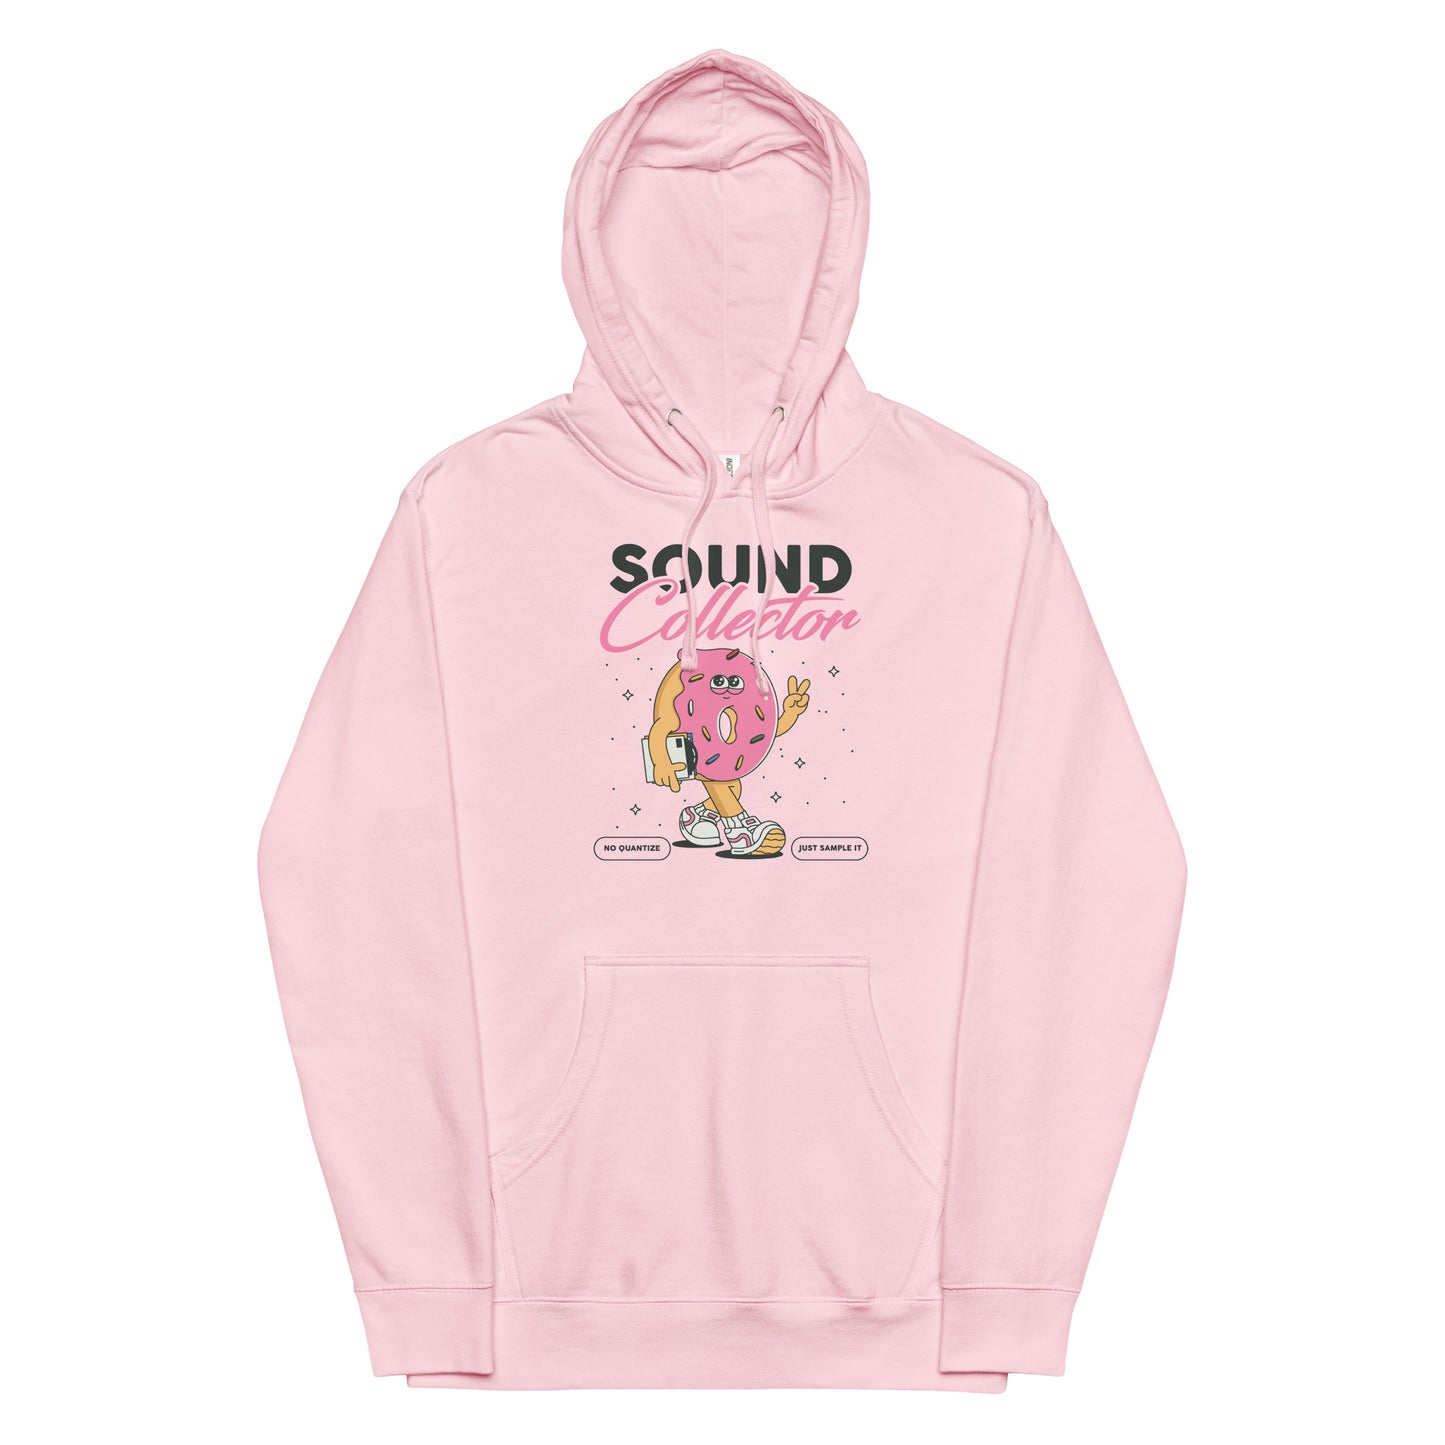 Sound Collector Hoodie